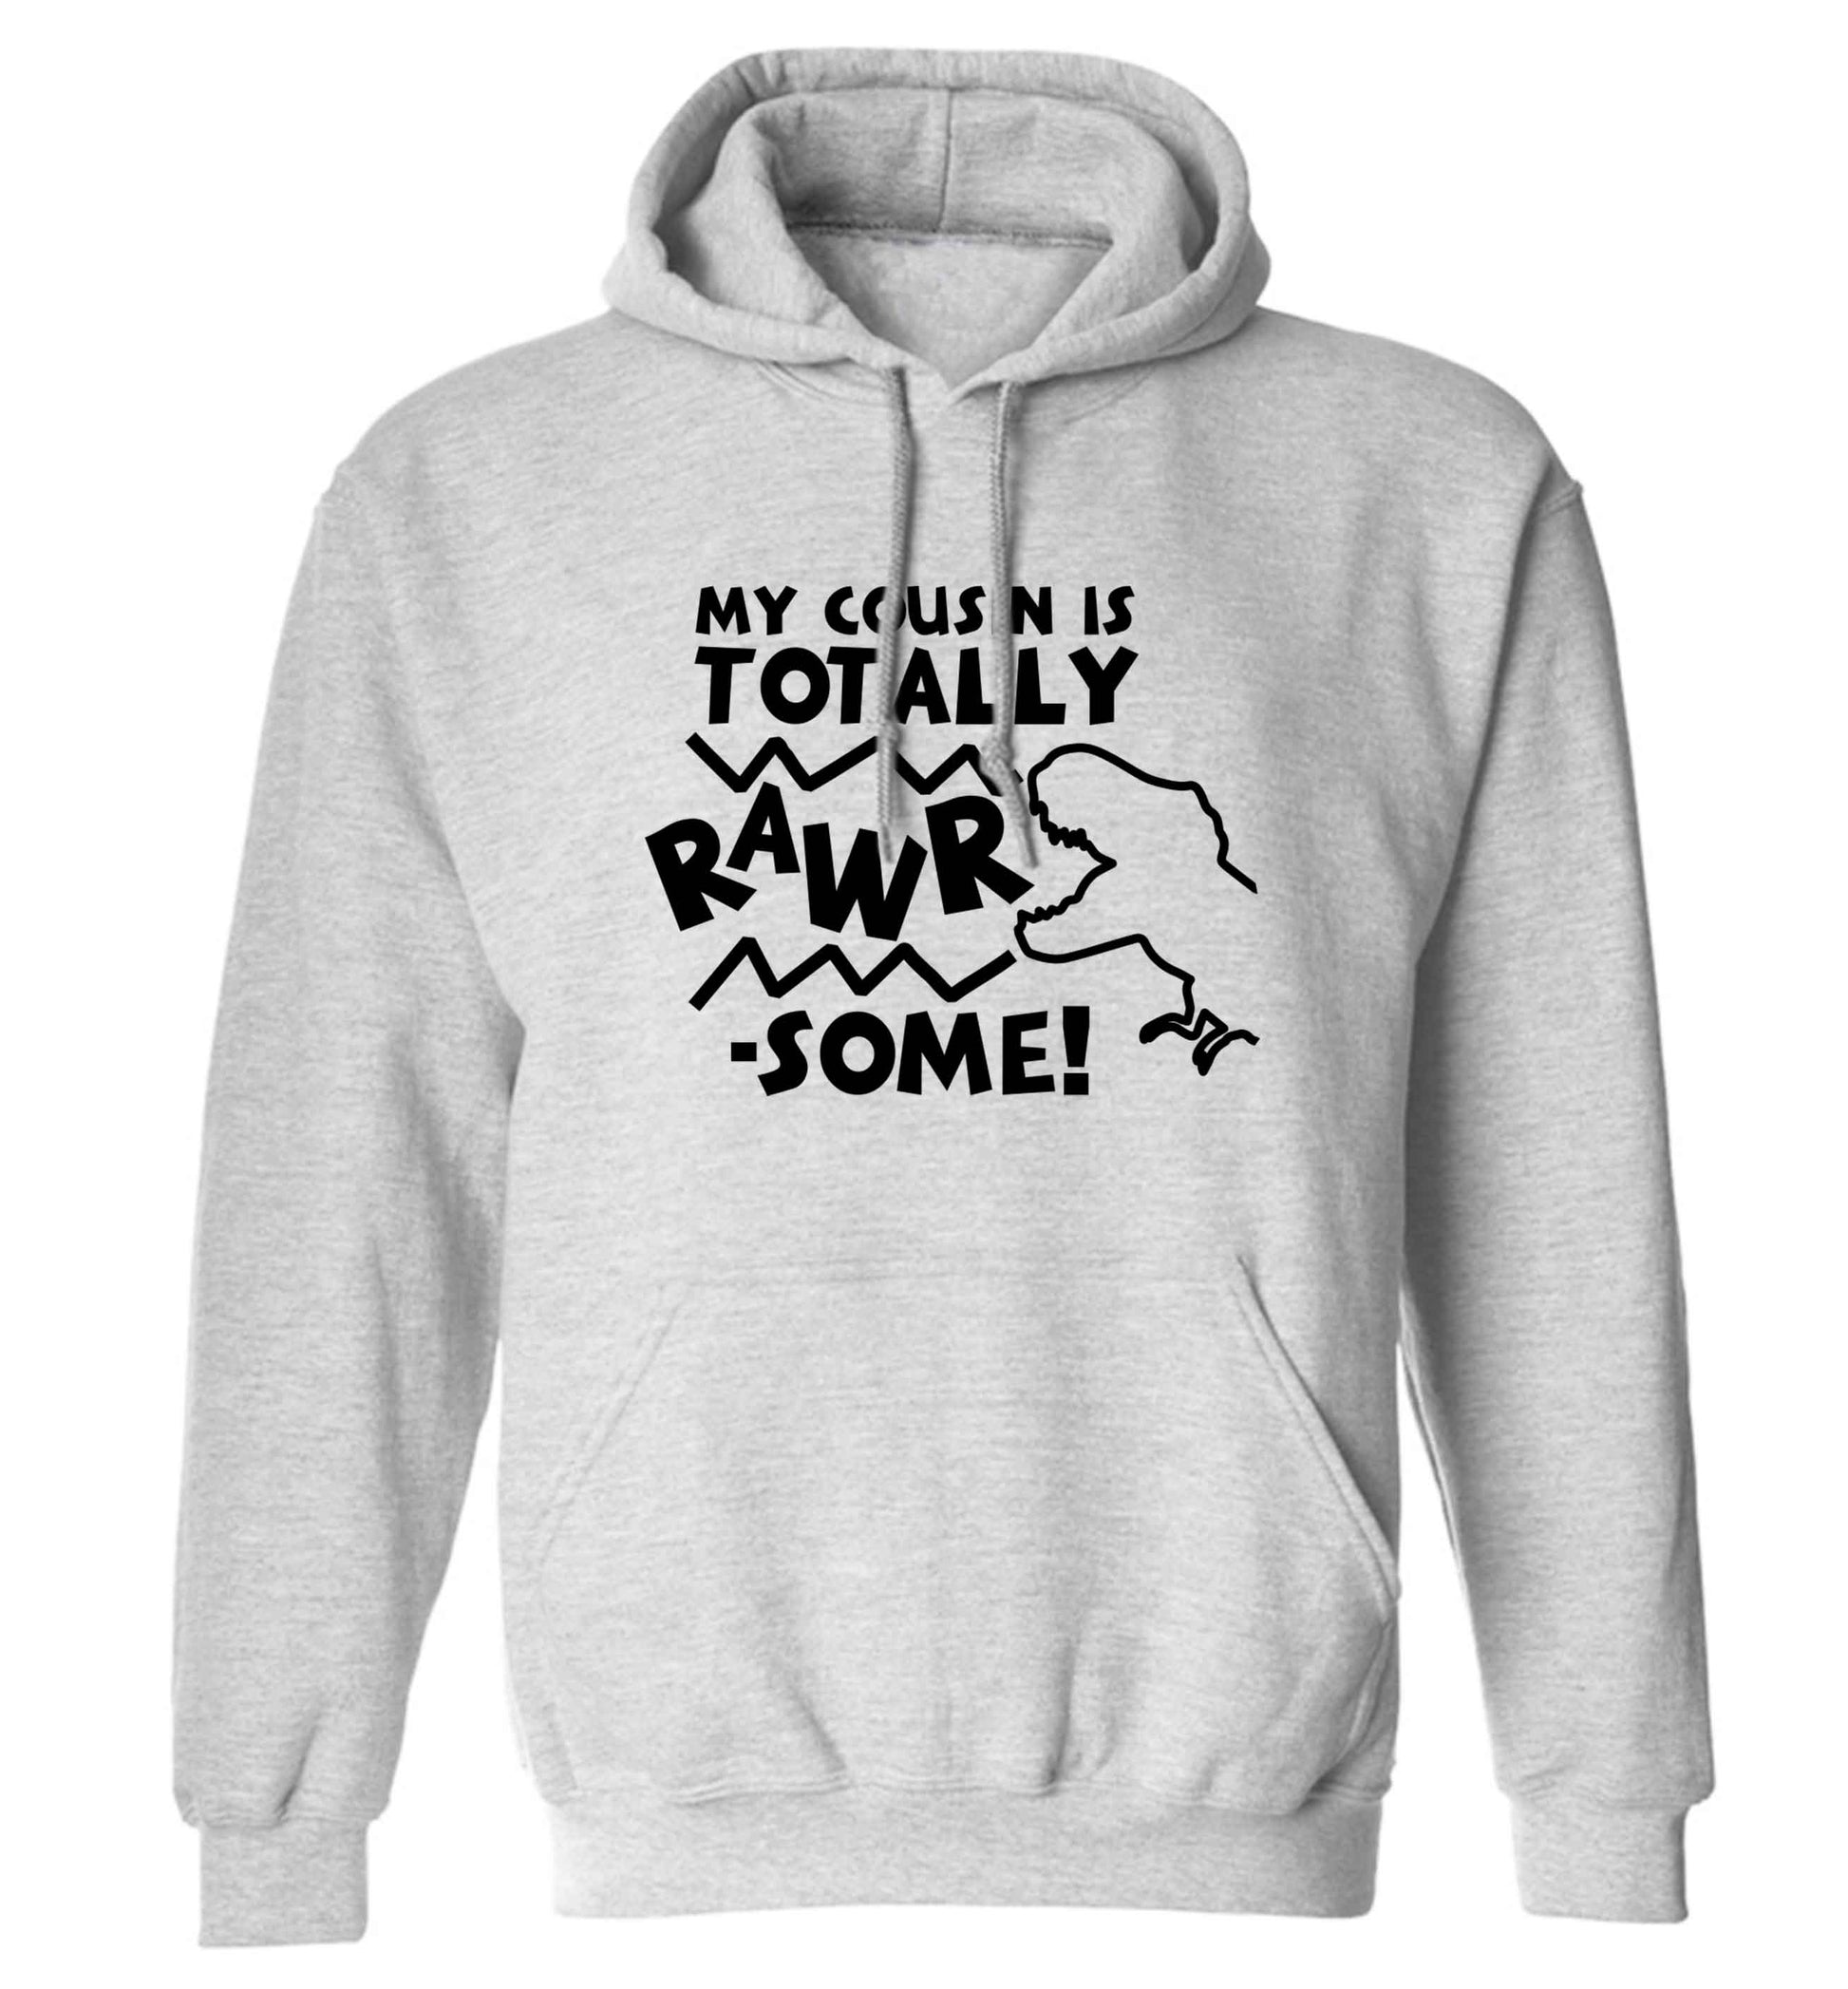 My cousin is totally rawrsome adults unisex grey hoodie 2XL